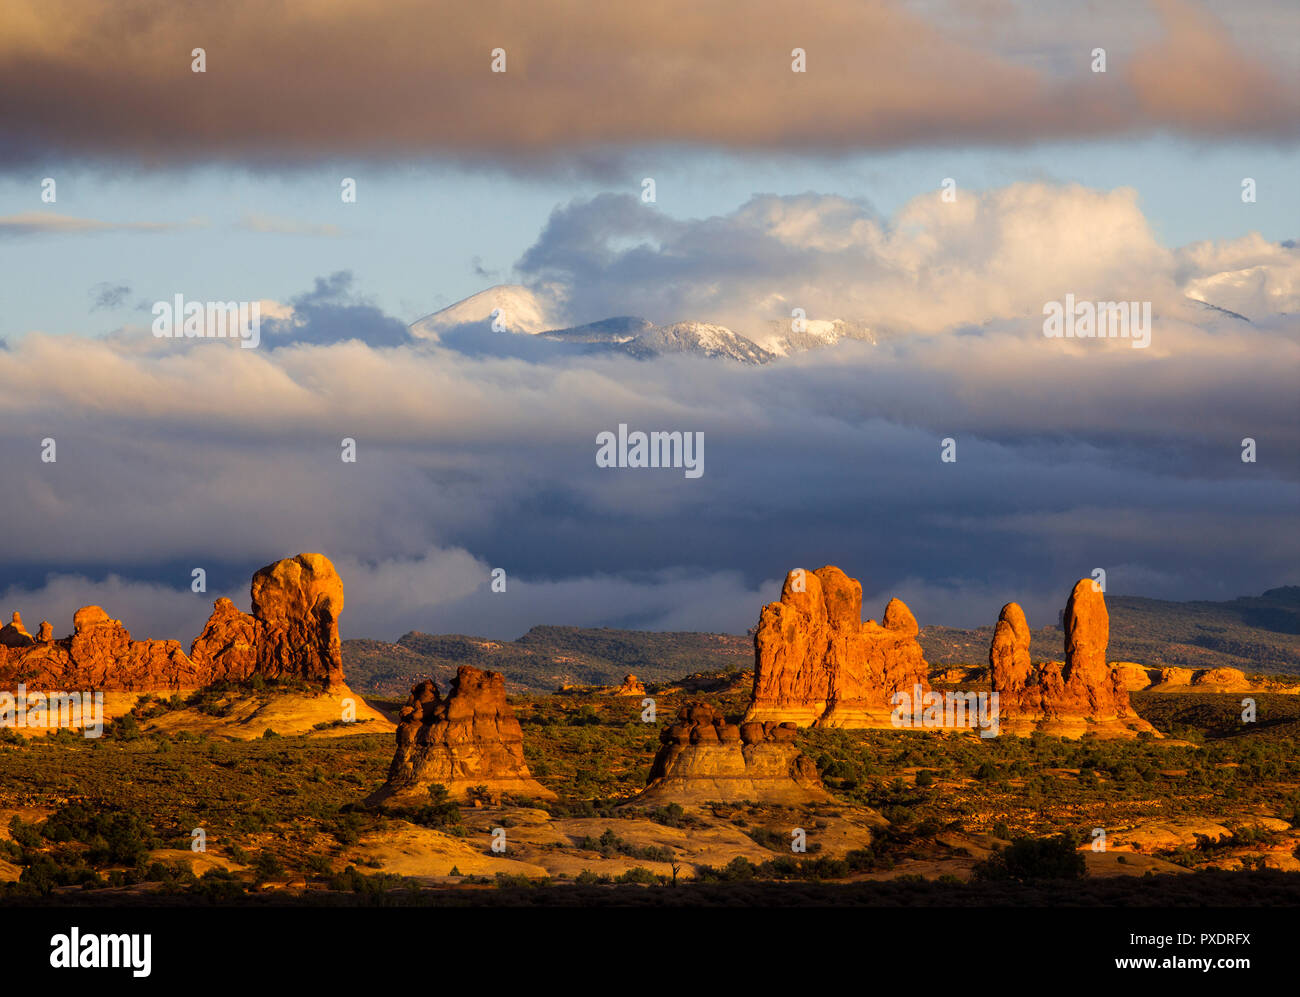 The rock formations of the Windows District of Arches National Park backed by the La Sal Mountains, Utah. Stock Photo